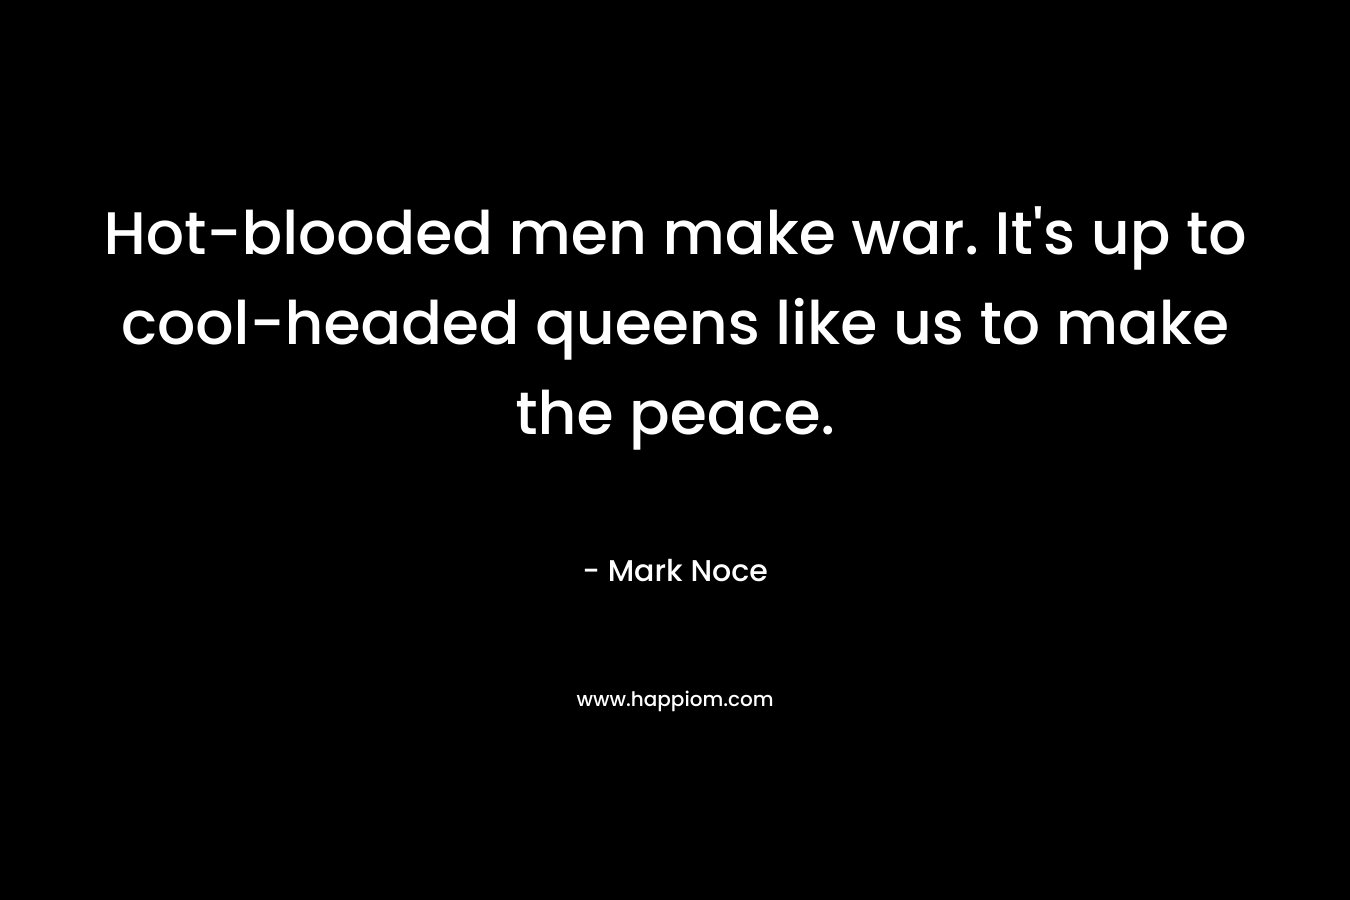 Hot-blooded men make war. It's up to cool-headed queens like us to make the peace.